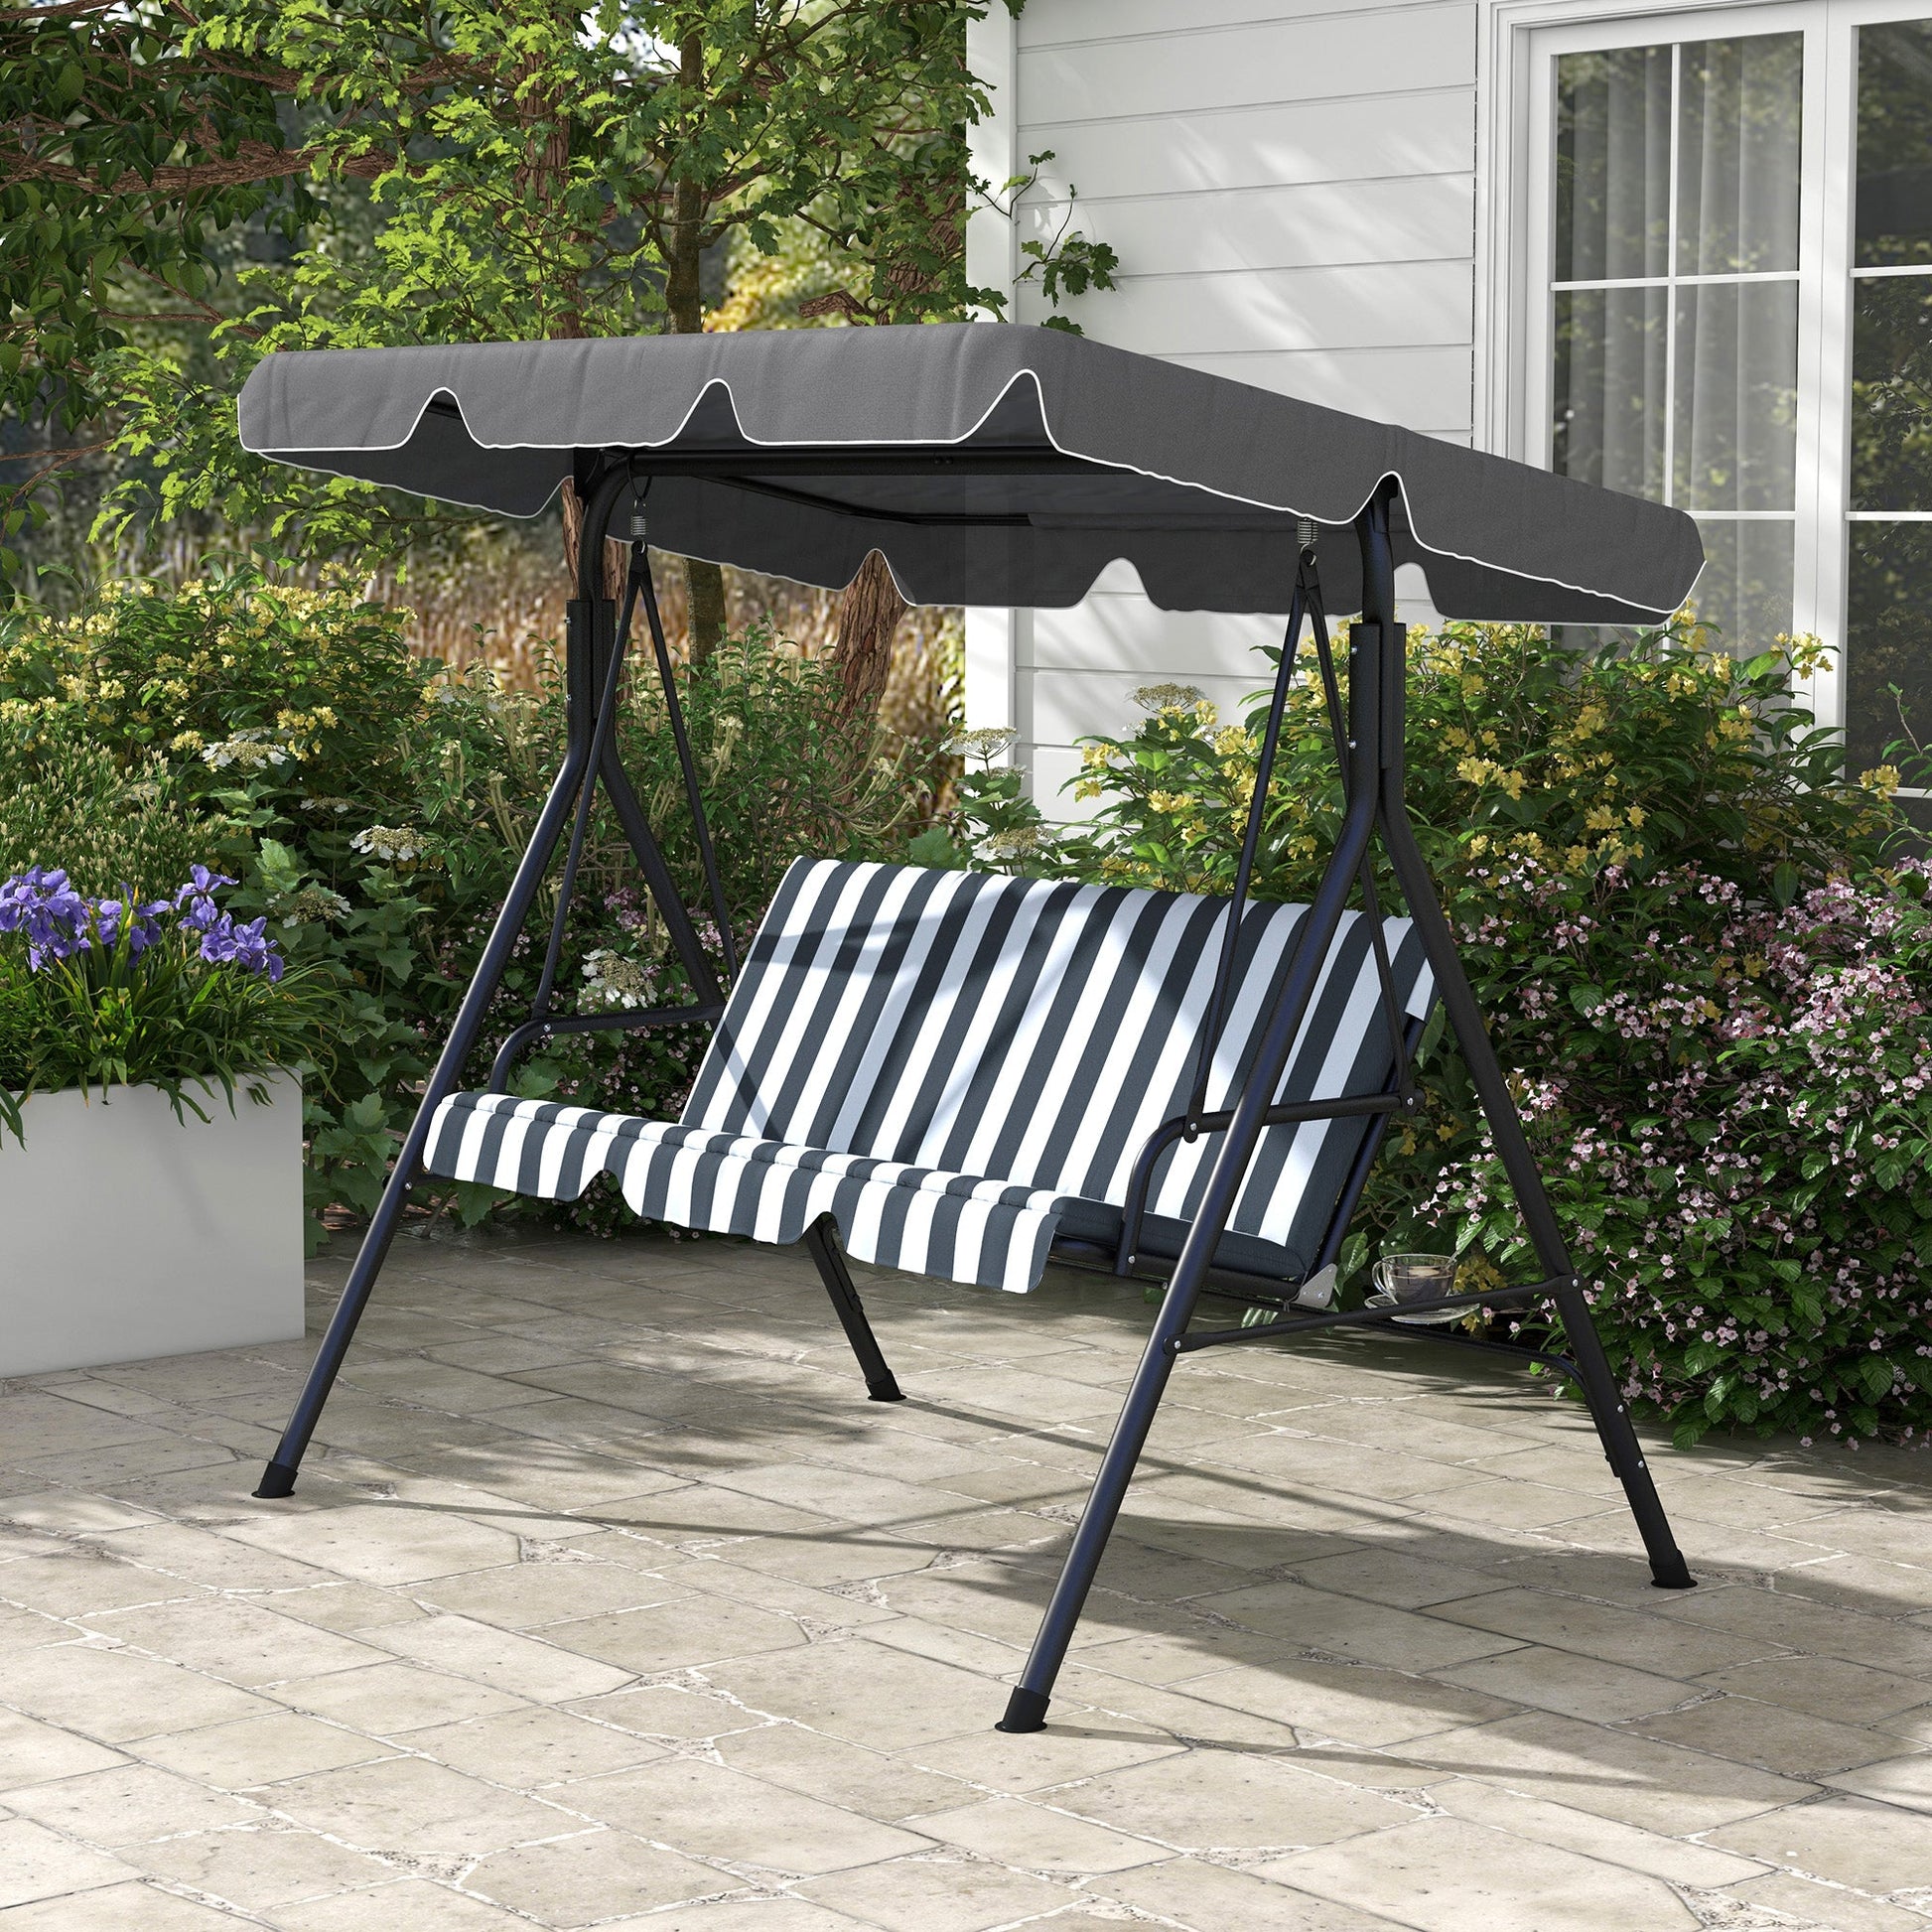 3-Seater Outdoor Porch Swing with Adjustable Canopy, Patio Swing Chair for Garden, Poolside, Backyard, Grey and White at Gallery Canada